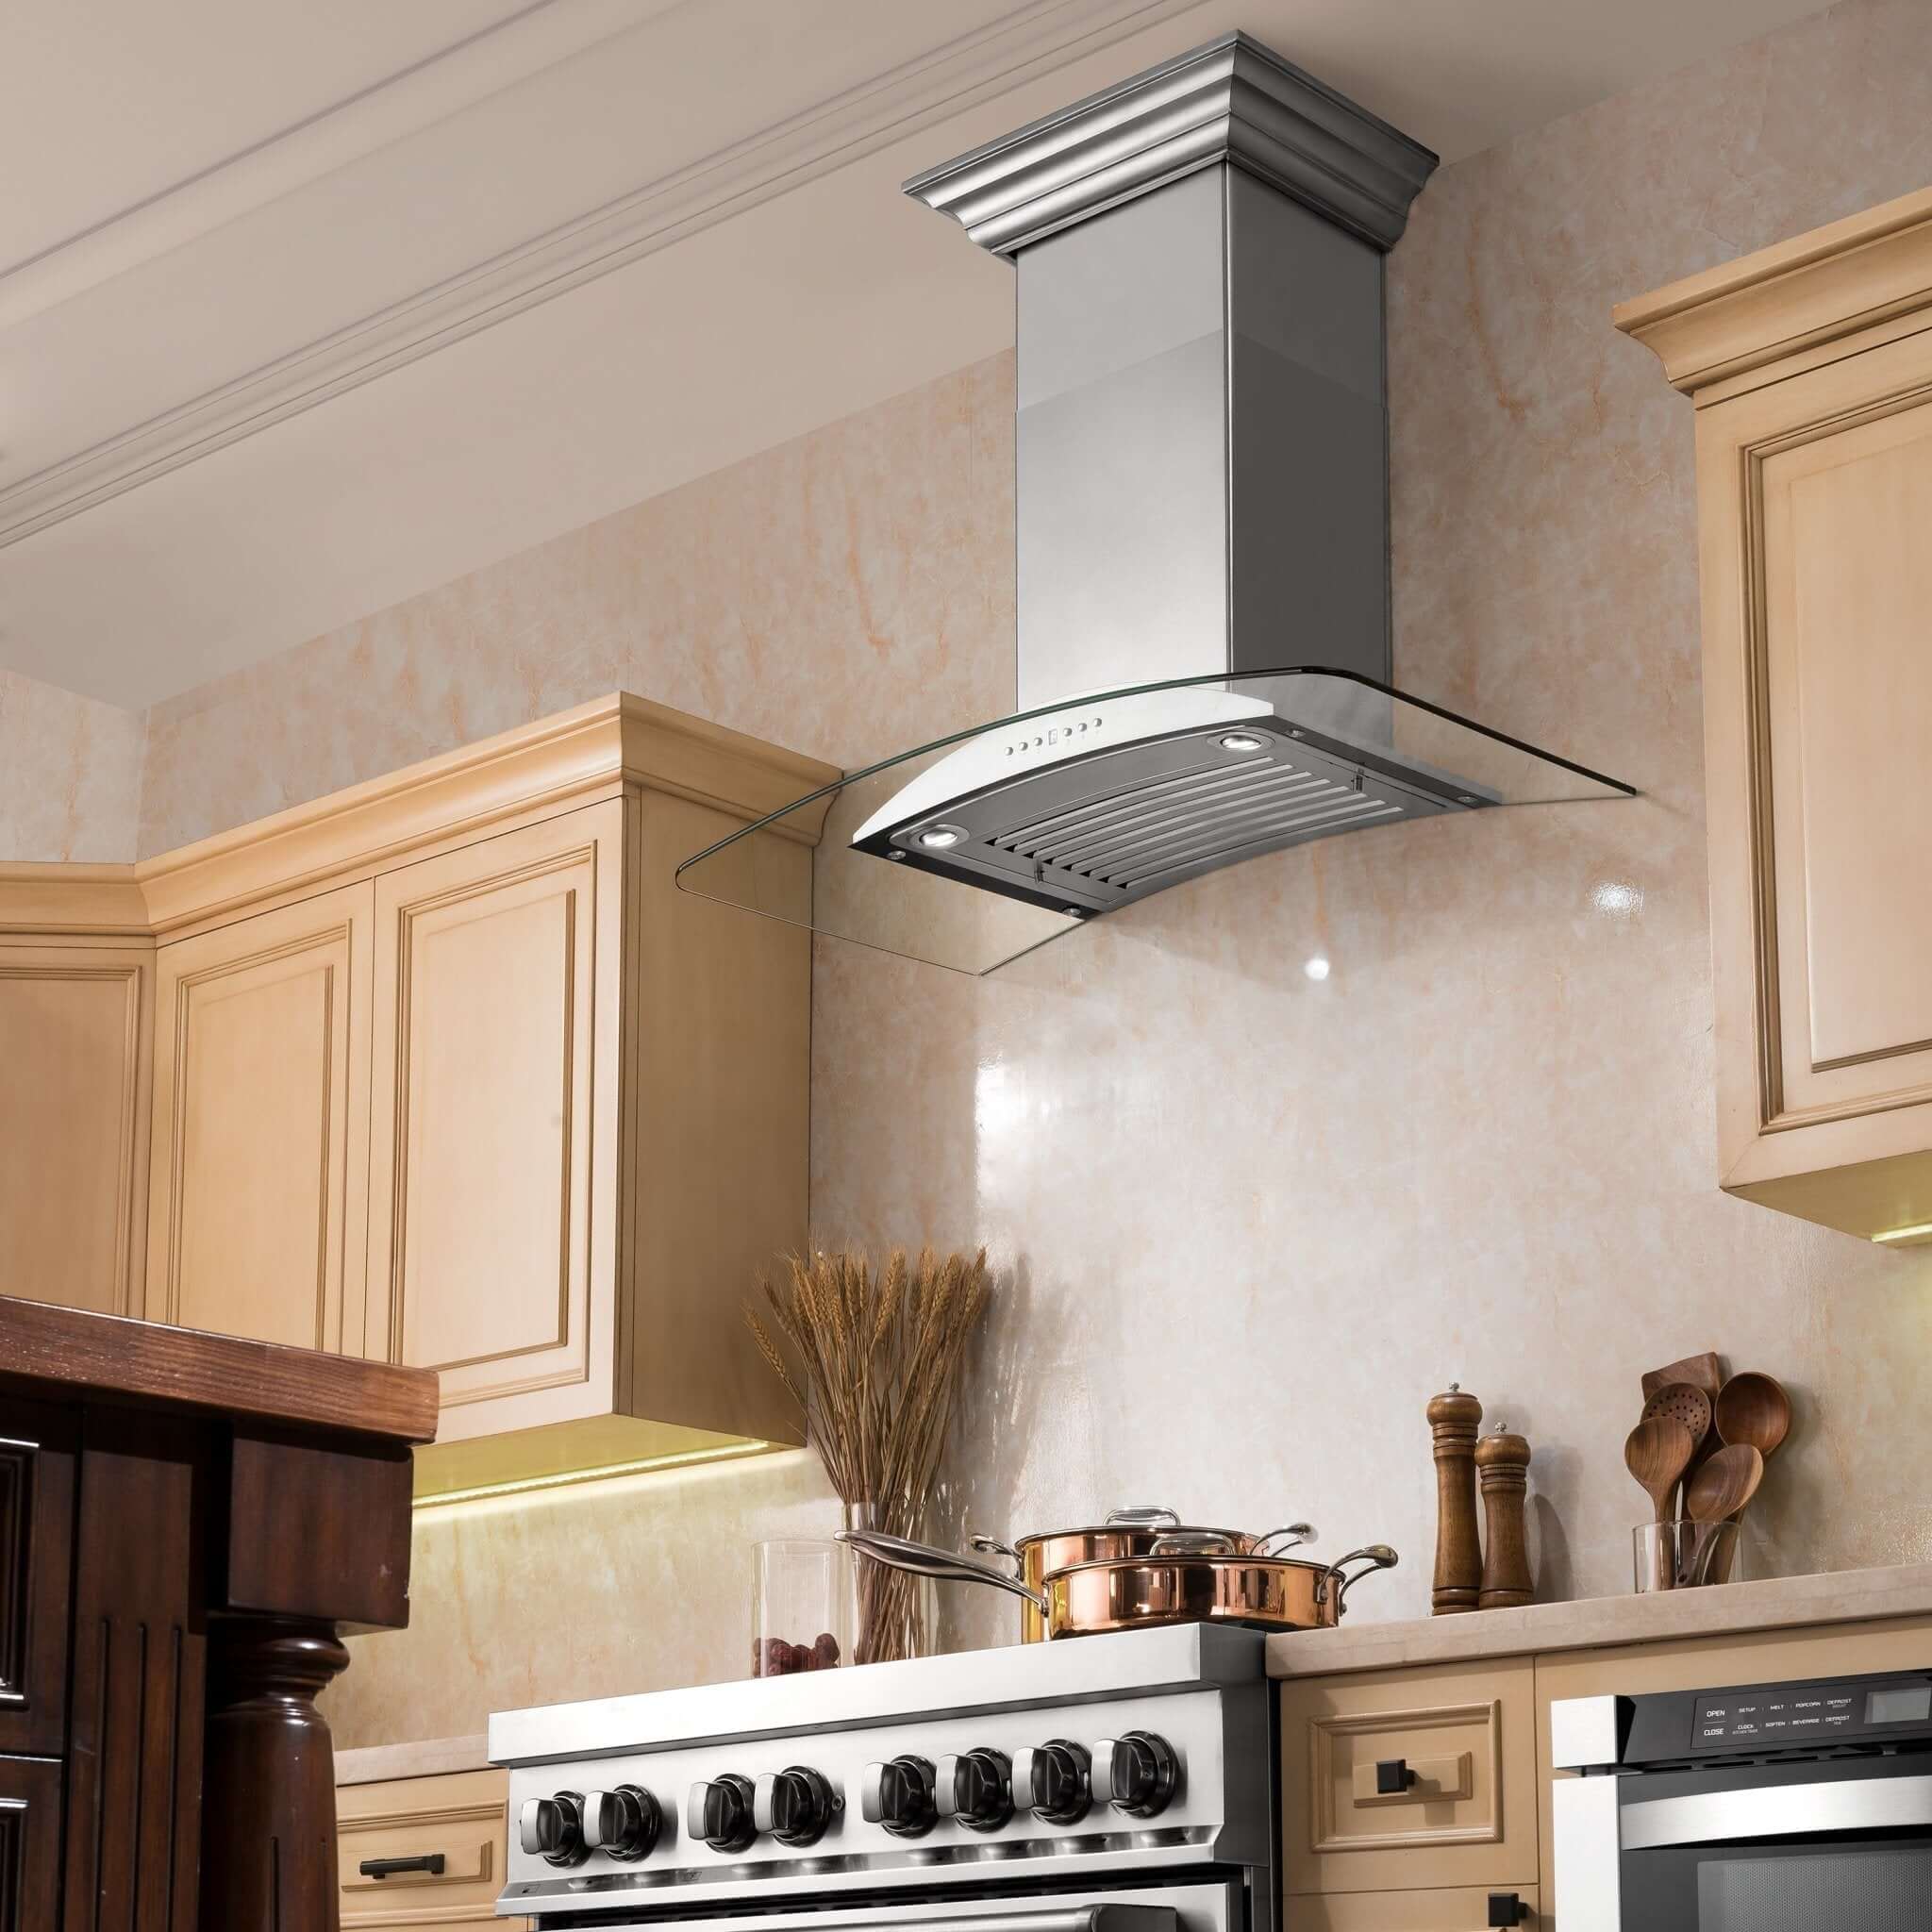 ZLINE Convertible Vent Wall Mount Range Hood in Stainless Steel & Glass (KN) in a farmhouse-style kitchen with natural wood cabinetry side under.